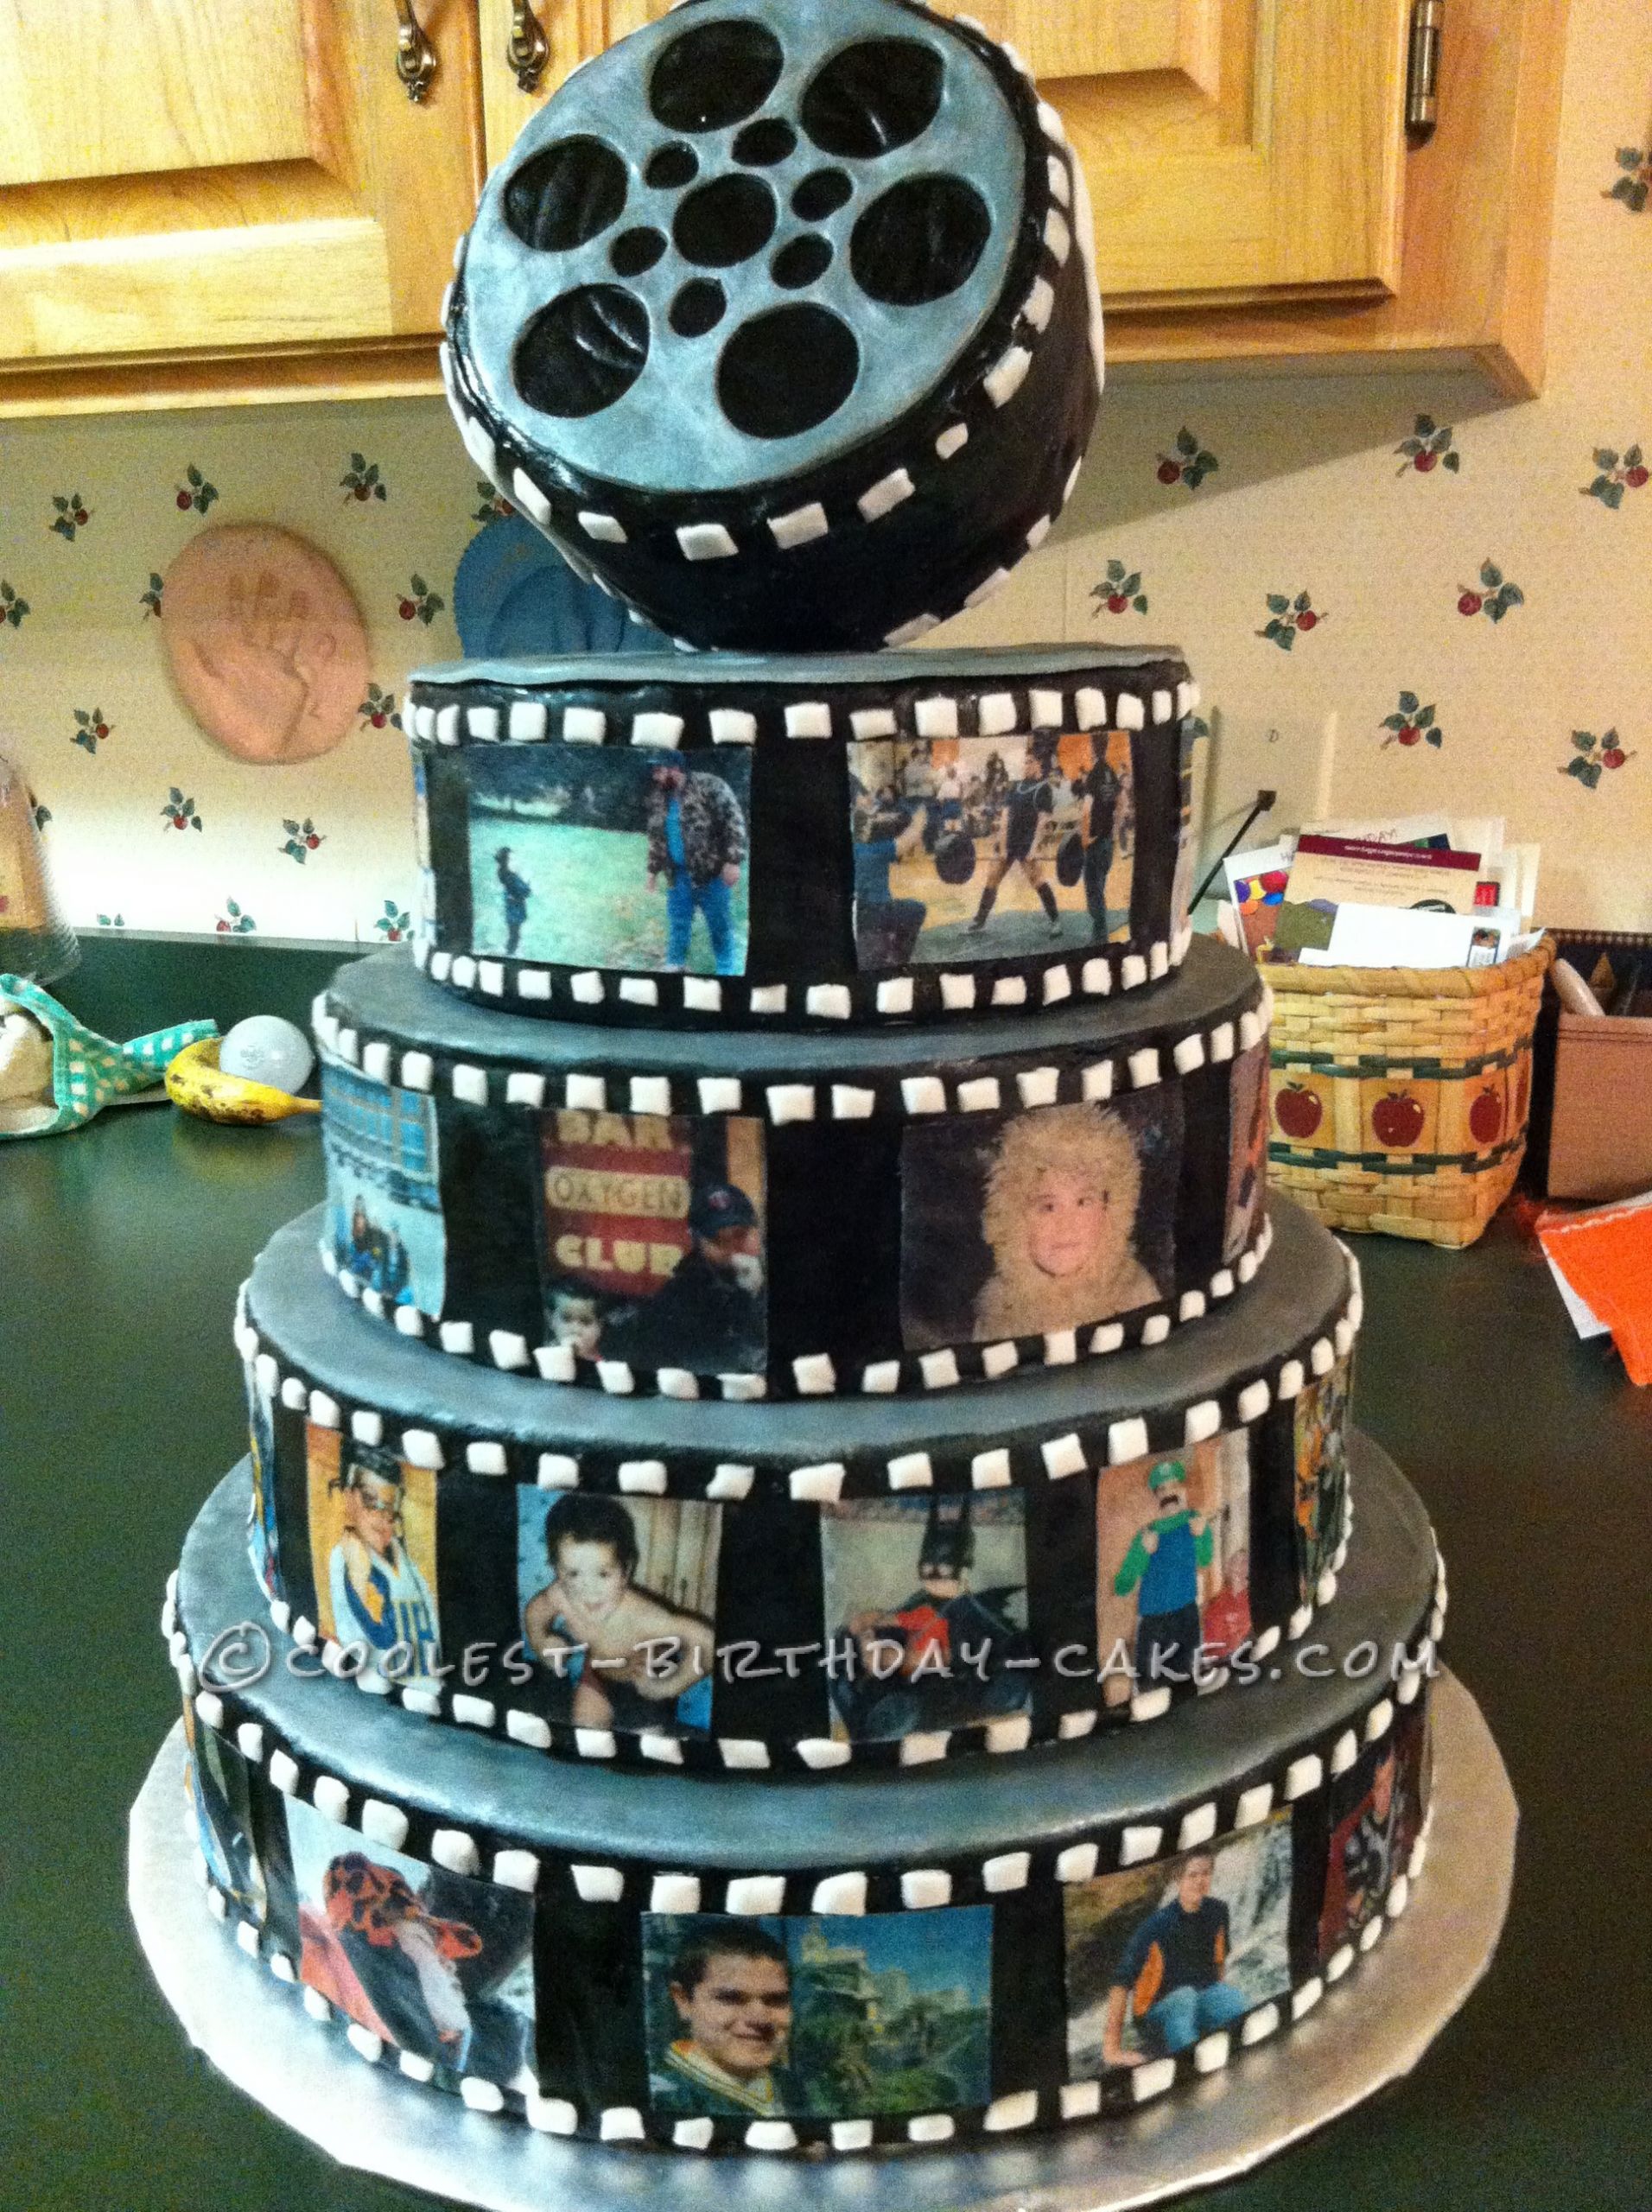 Coolest Birthday Cakes
 Coolest Snap Shot Reel Birthday Cake